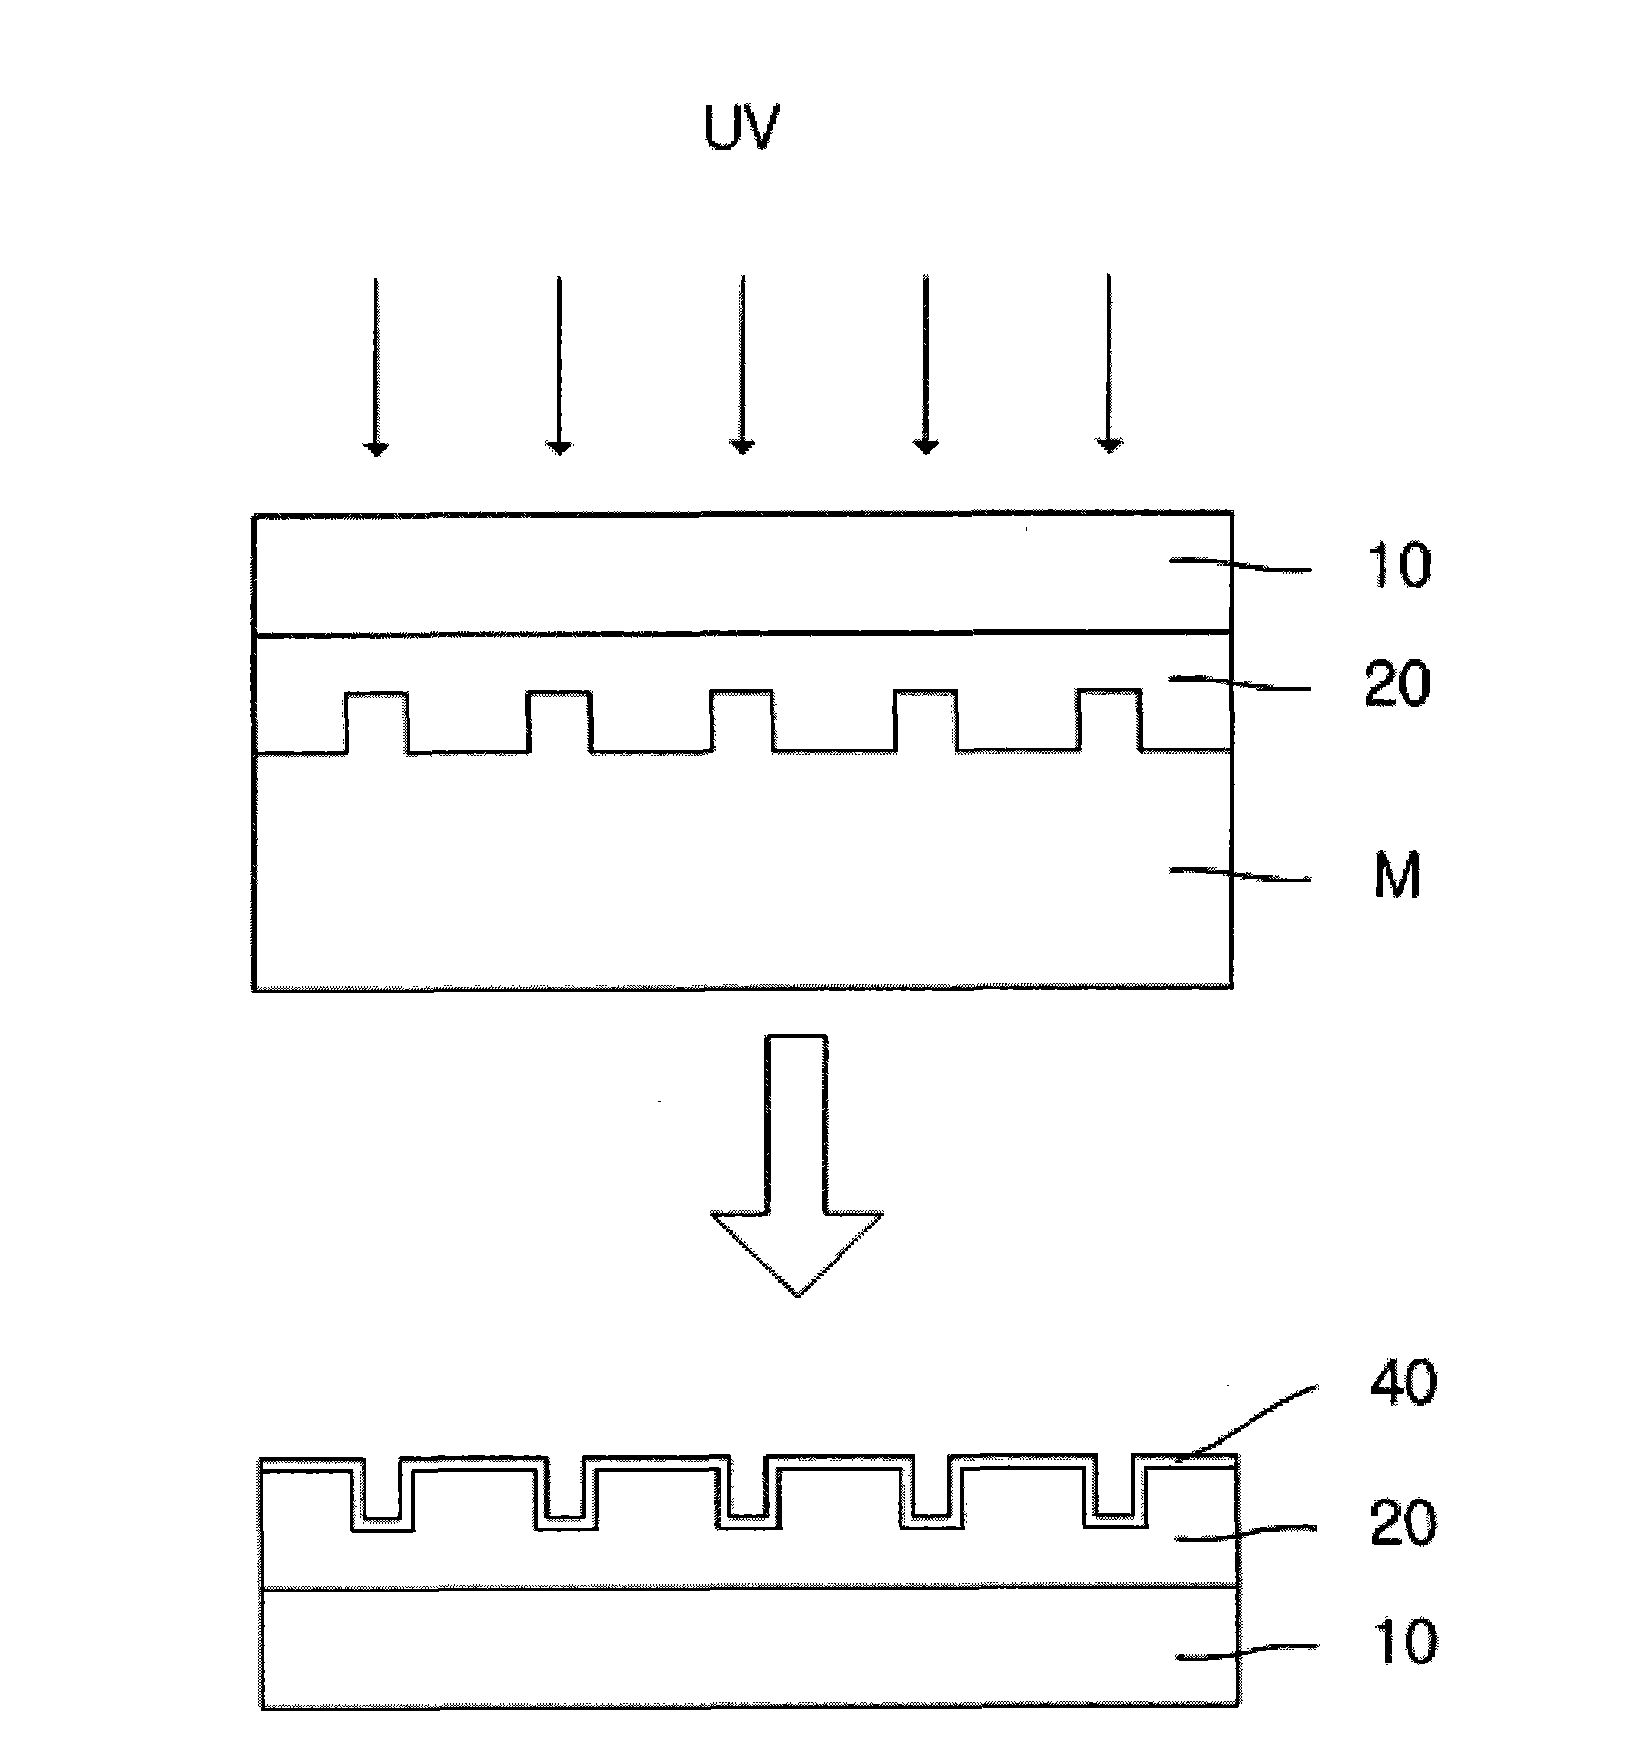 Multi-layered article and method of fabricating the same